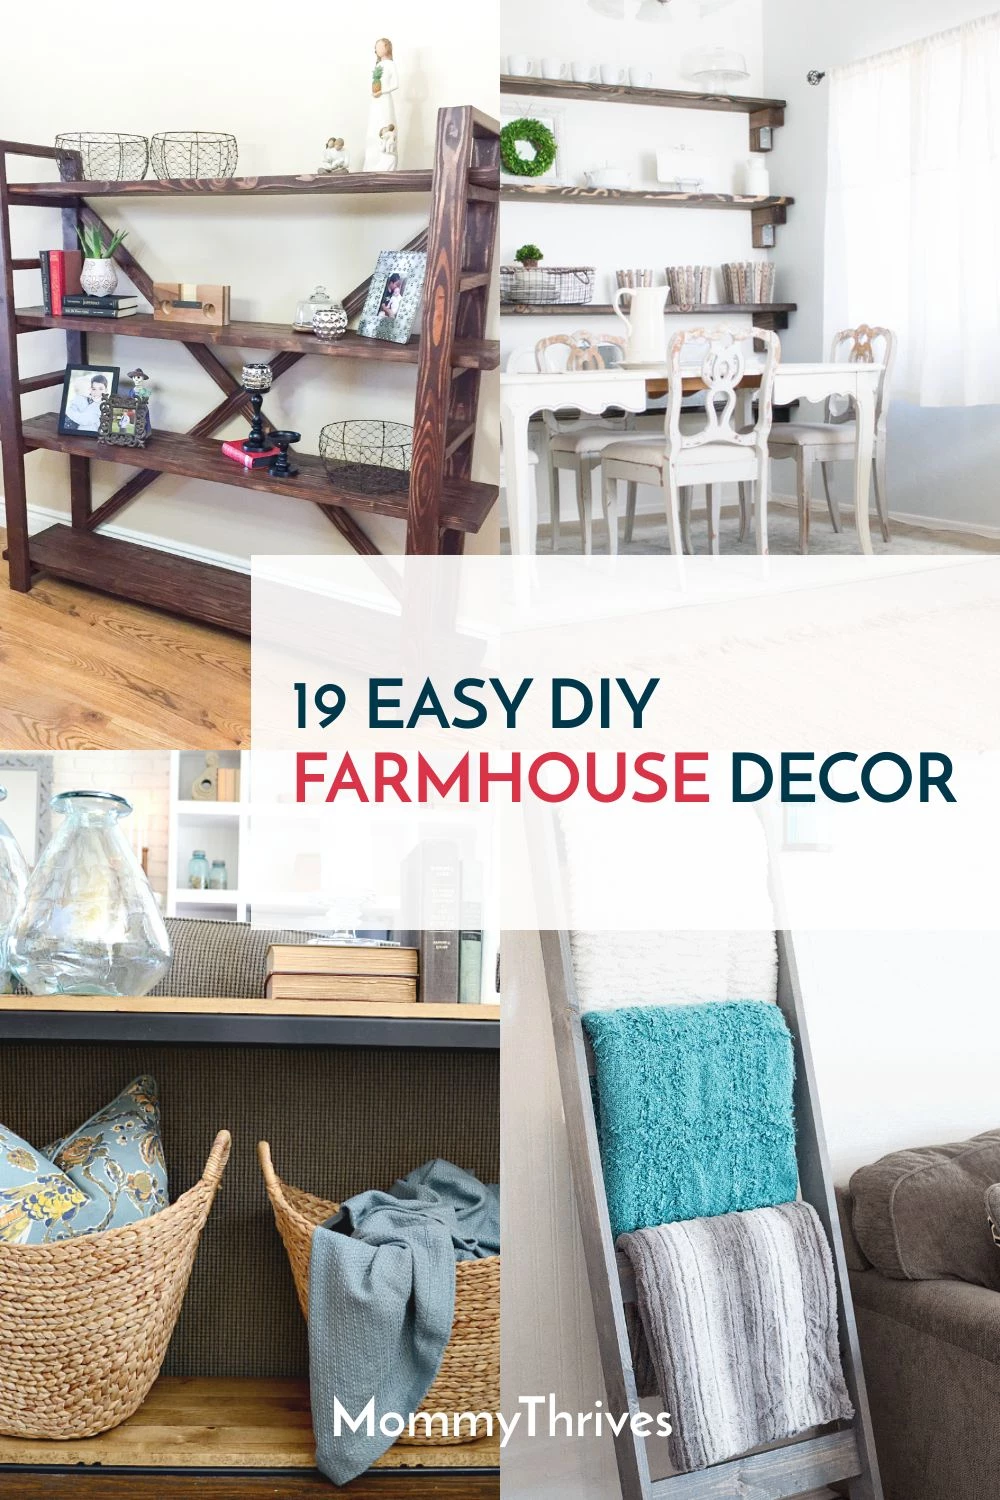 https://www.mommythrives.com/wp-content/uploads/2018/05/DIY-Farmhouse-Decor-Furniture-DIY-Projects-For-Farmhouse-Decor-Farmhouse-Decor-On-A-Budget.webp